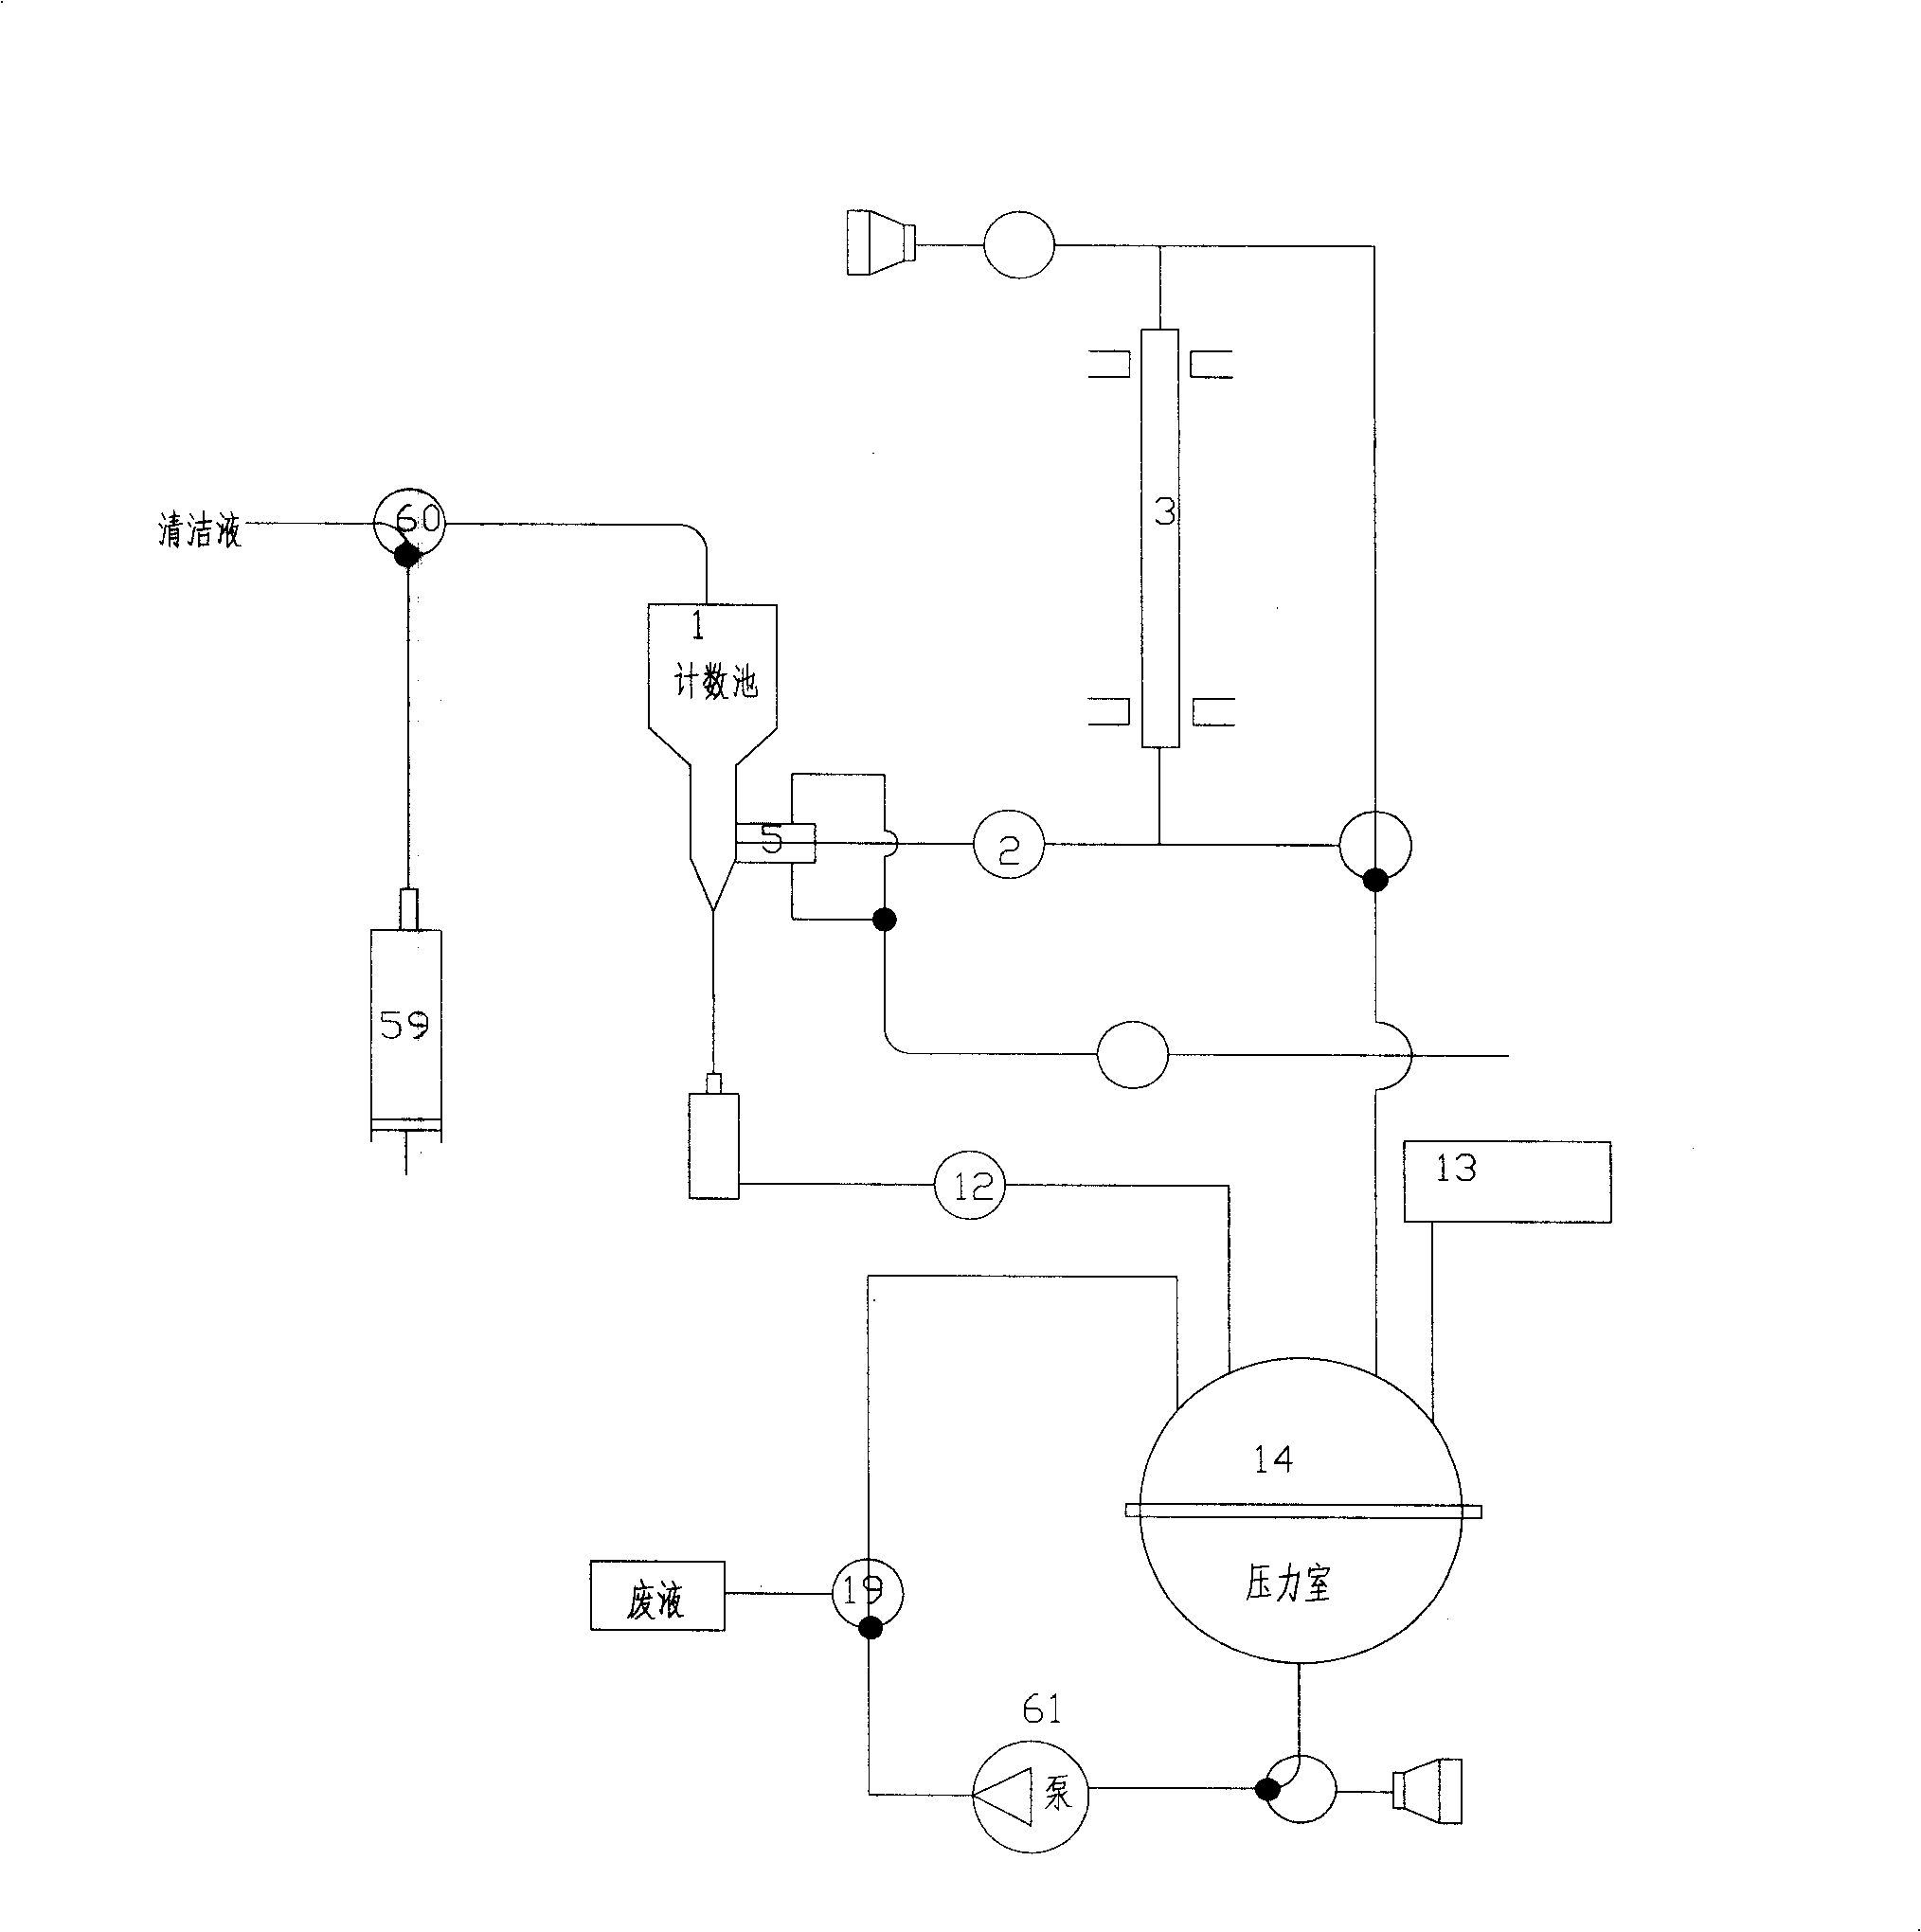 Blood cell analyzer cleaning agent automatic filling method and device